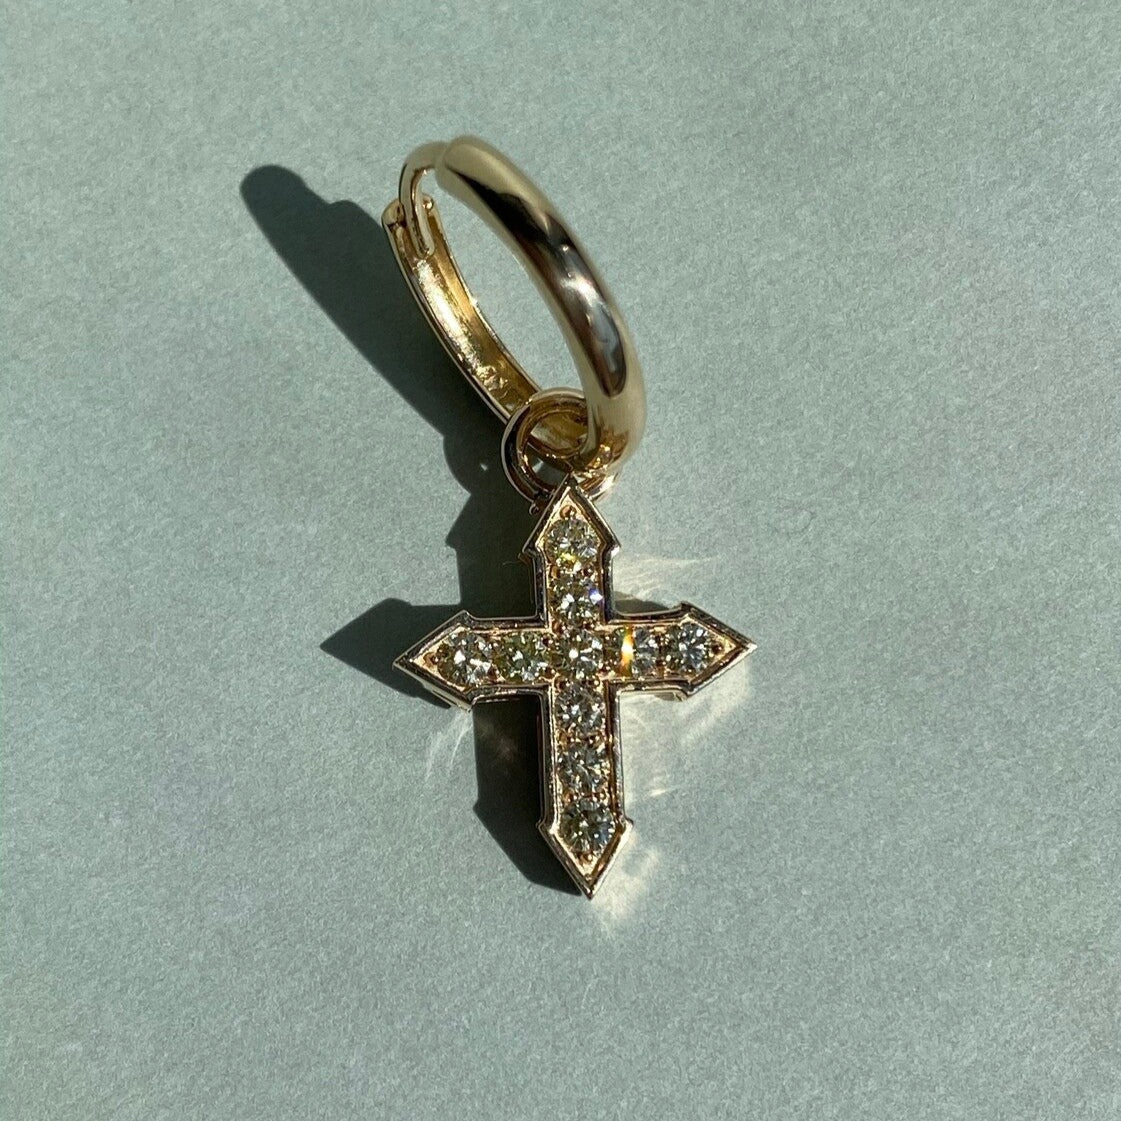 EARRING CROSS "GLOW" WITH YELLOW DIAMONDS / SOLID GOLD